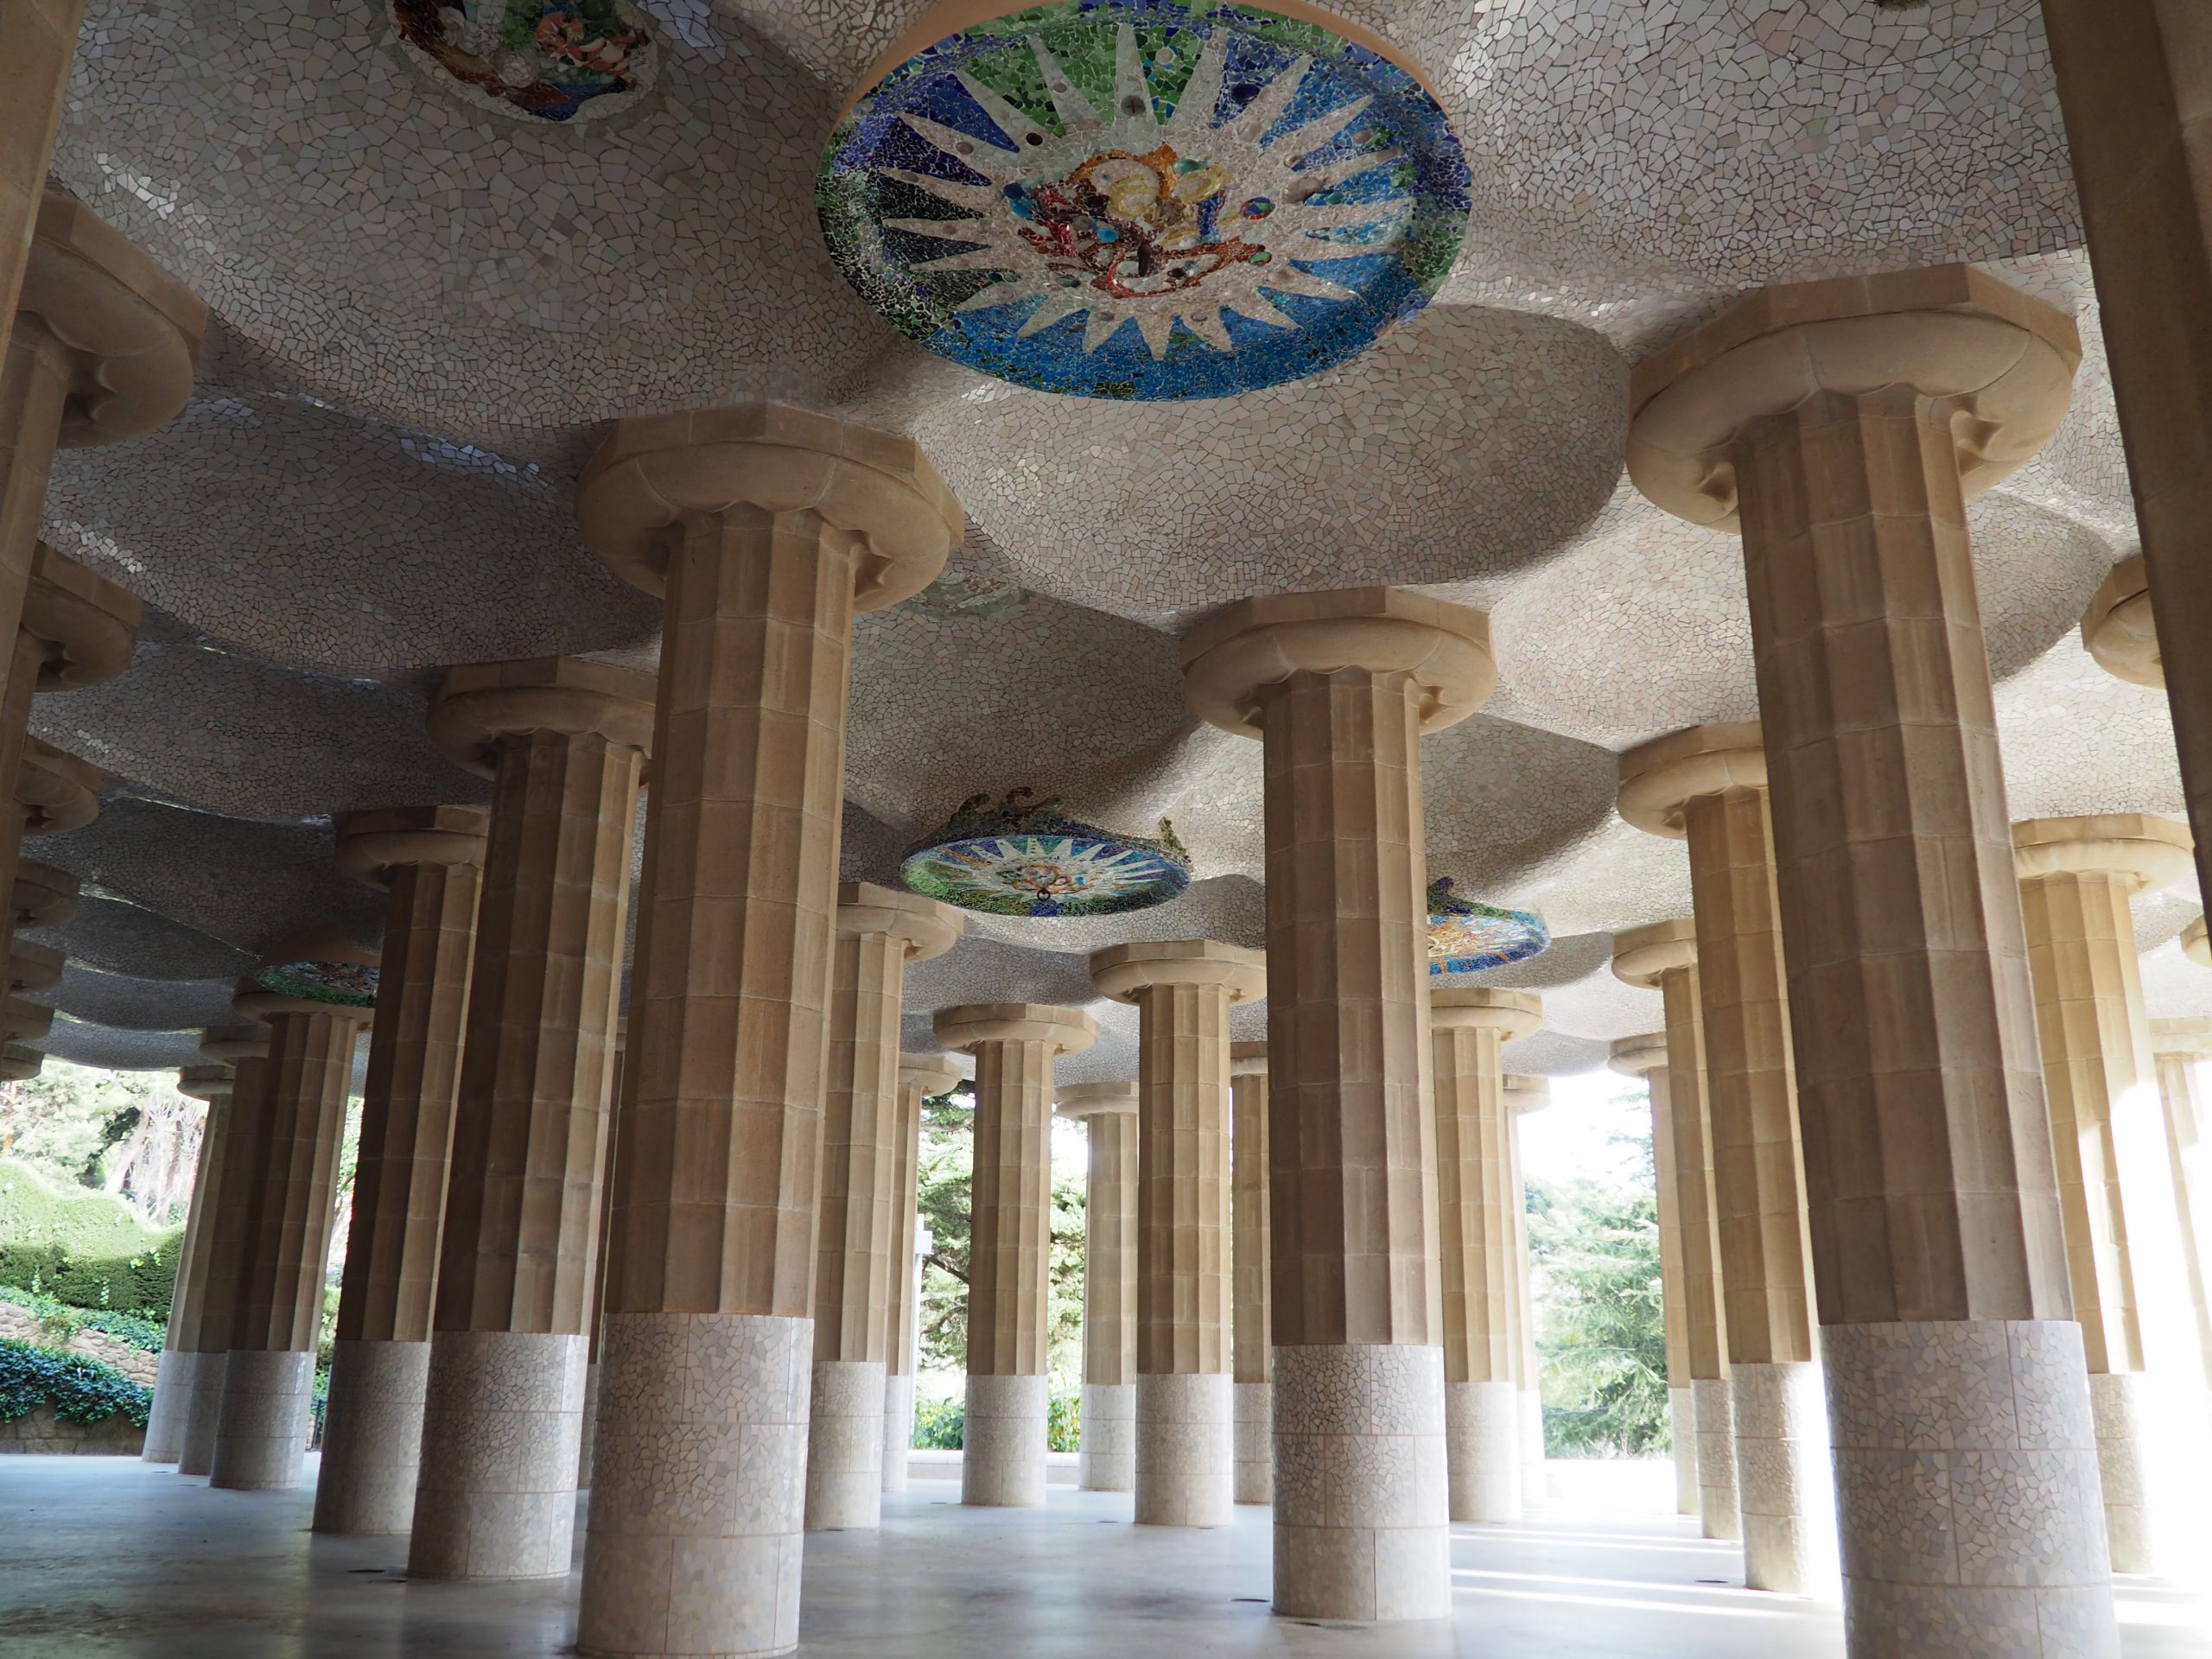 Columns room with mosaics on the ceiling representing the four seasons. Park Güell, Barcelona for kids.